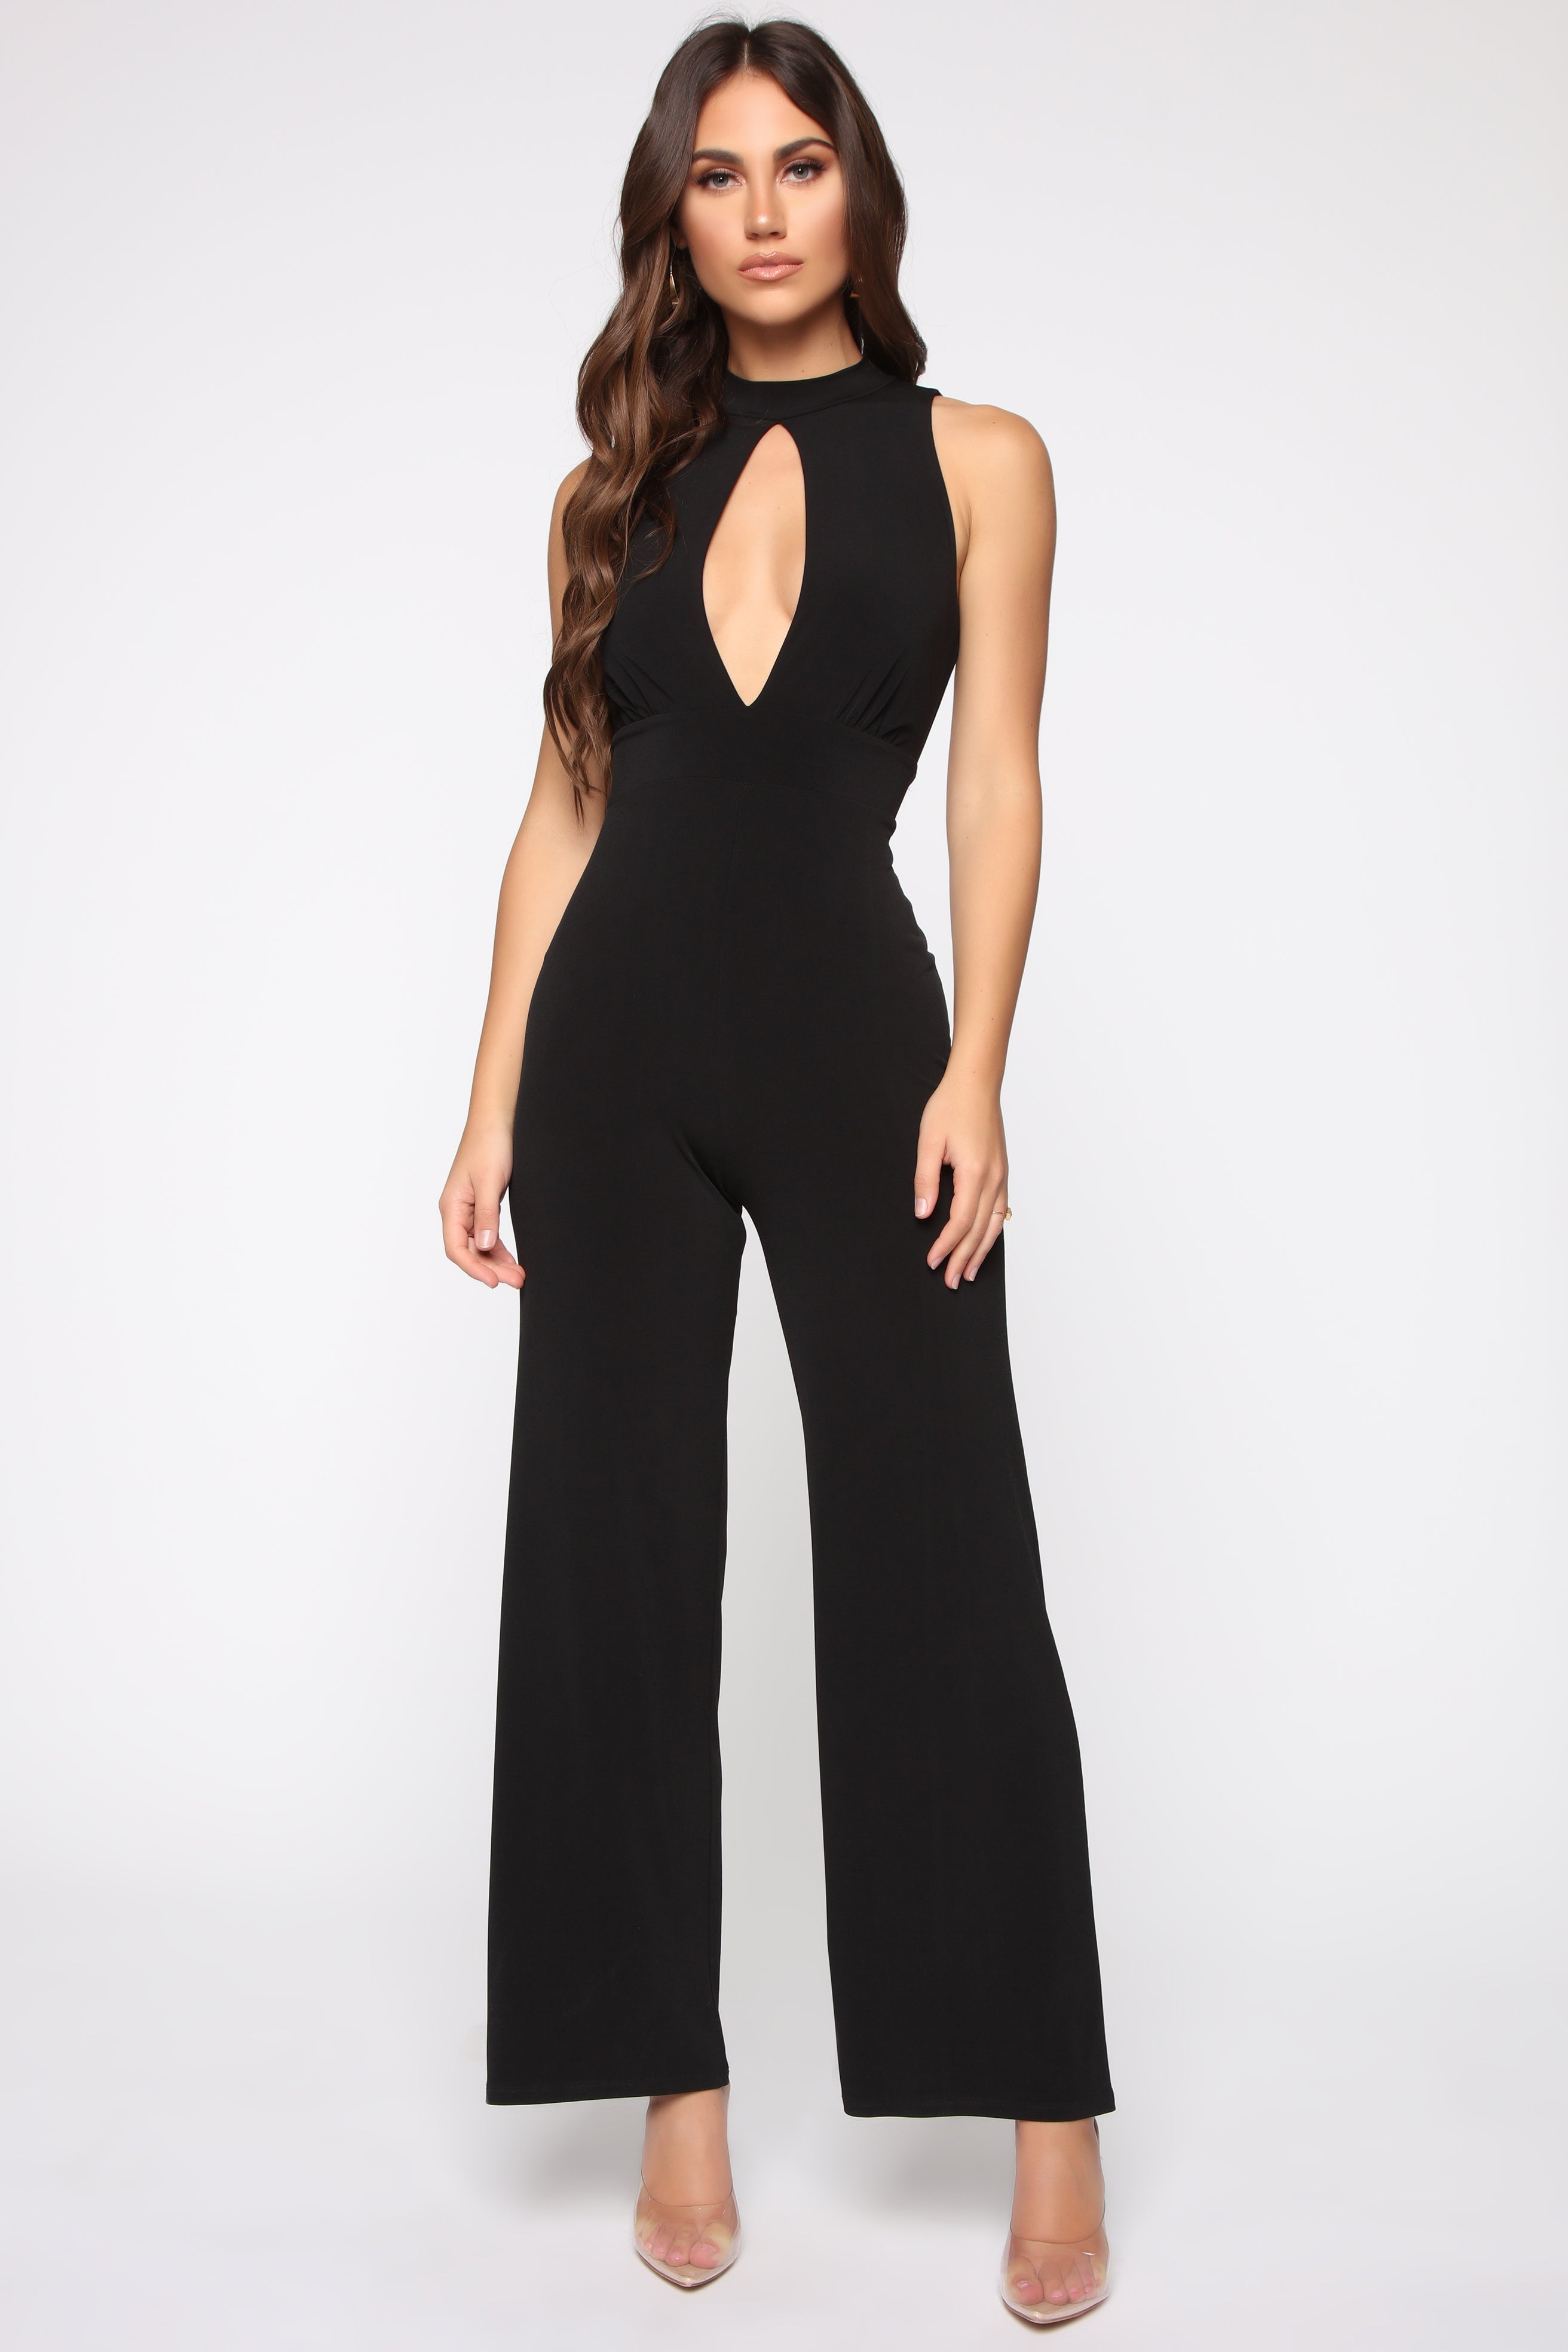 Key To Our Love Jumpsuit - Black